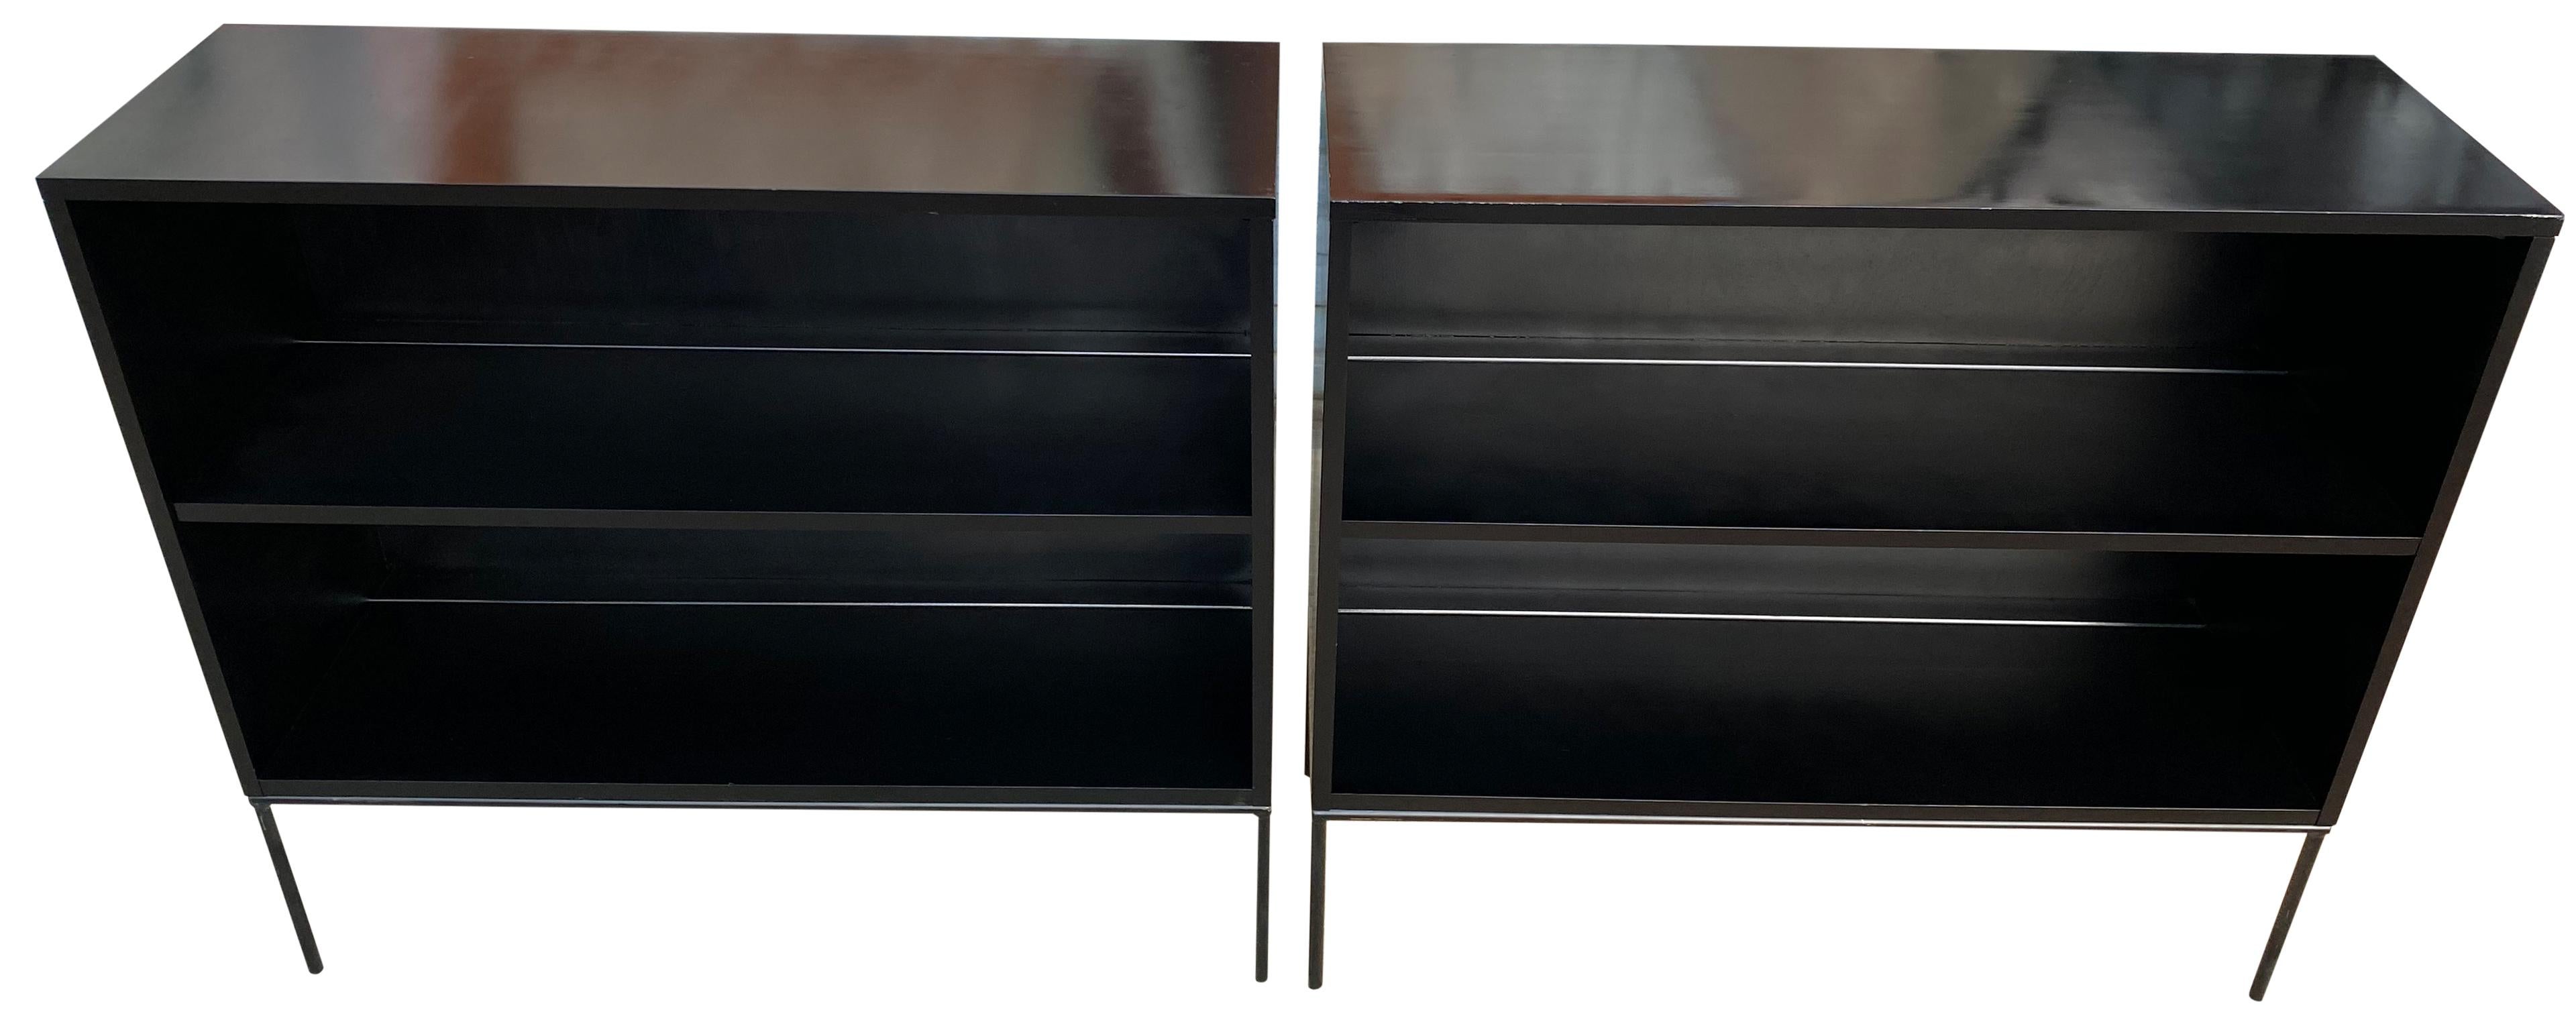 Pair of vintage midcentury Paul McCobb single bookcase #1516 black lacquer over maple with iron base. Beautiful bookcase set by Paul McCobb, circa 1950s Planner Group, single center fixed shelf, solid maple with black finish on rare iron base. Good